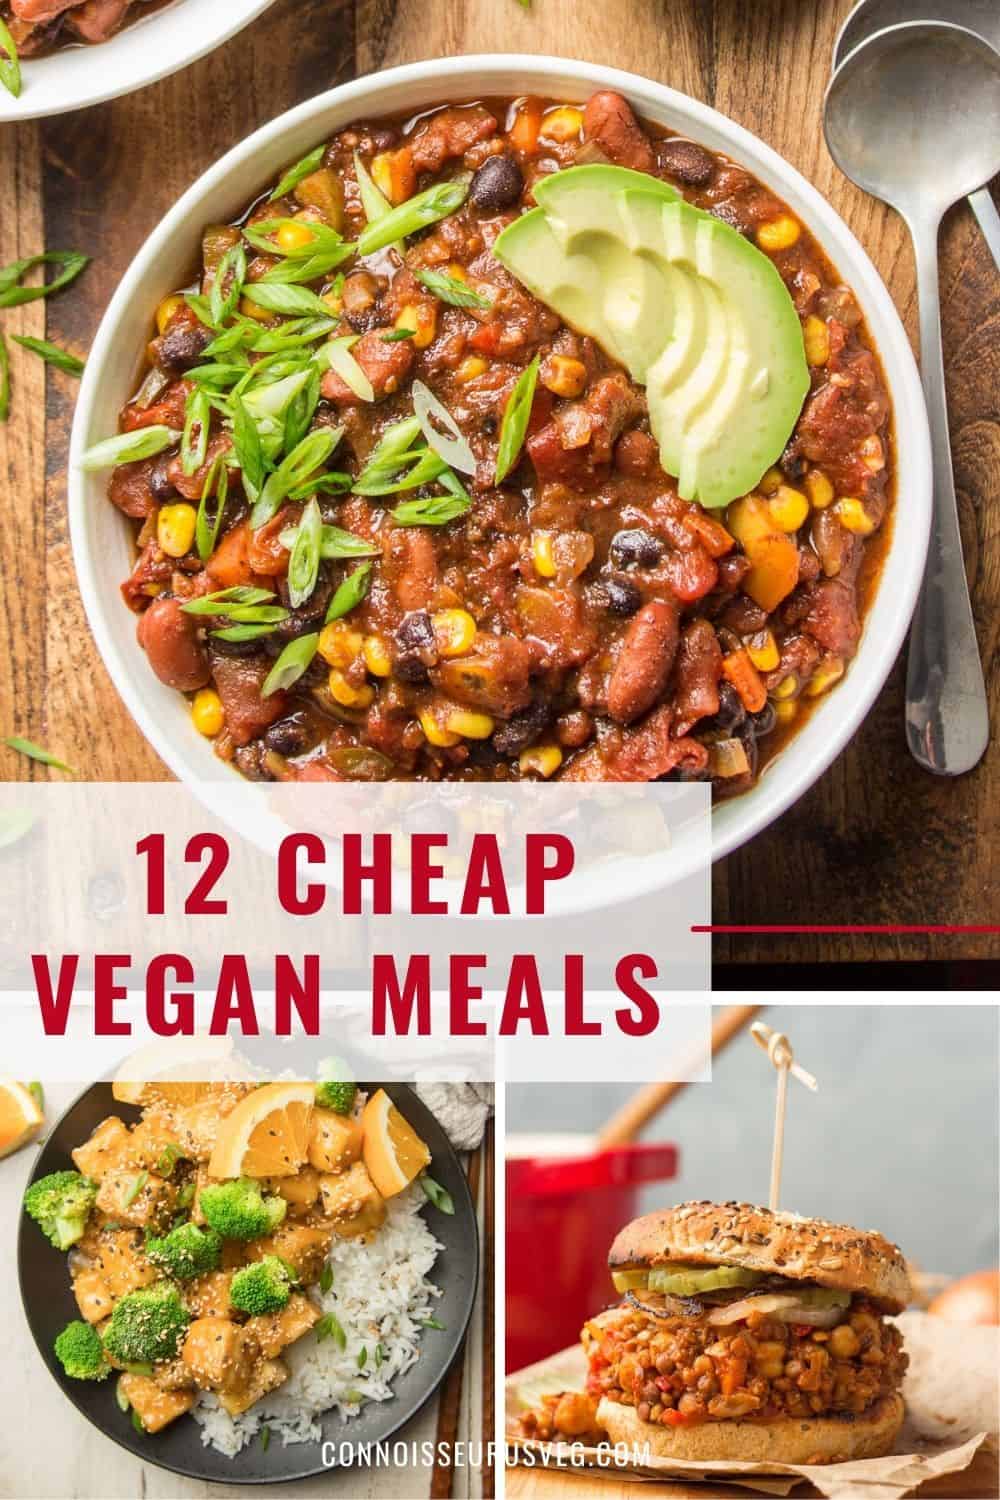 Graphic showing images of food with text overlay reading "12 cheap vegan meals."